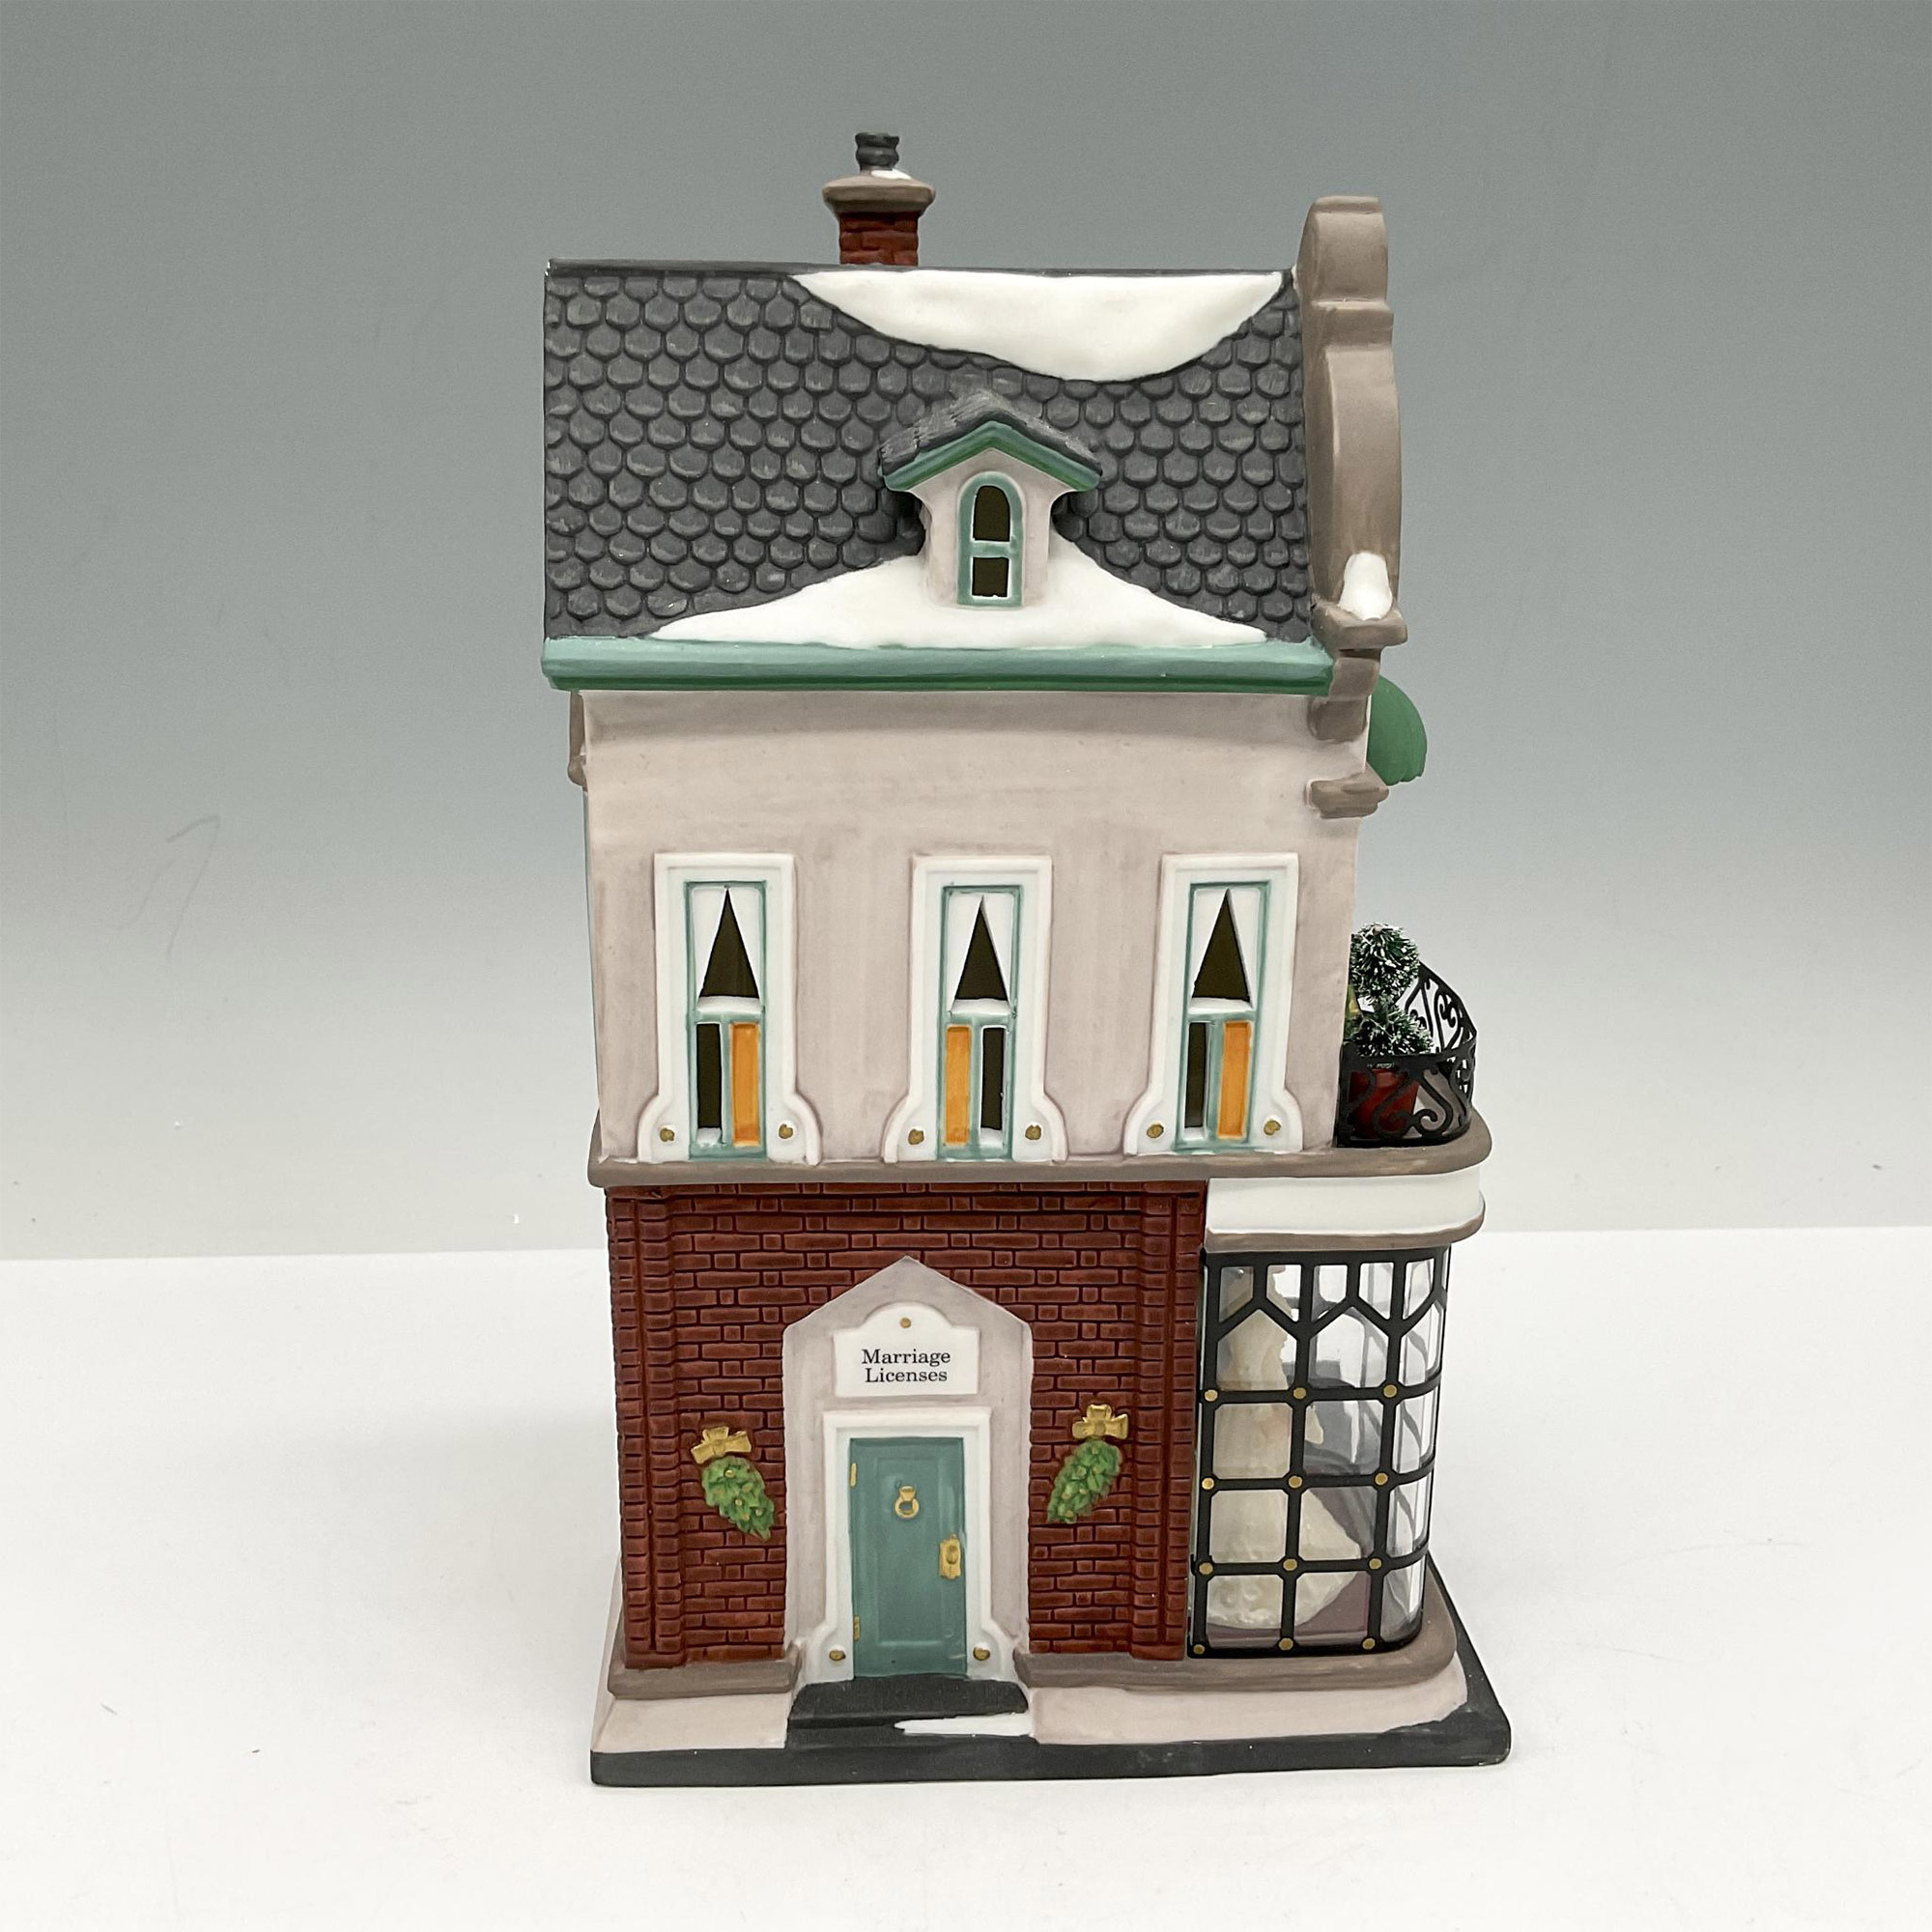 Department 56 Porcelain Christmas In The City, Wedding Gallery - Image 2 of 6